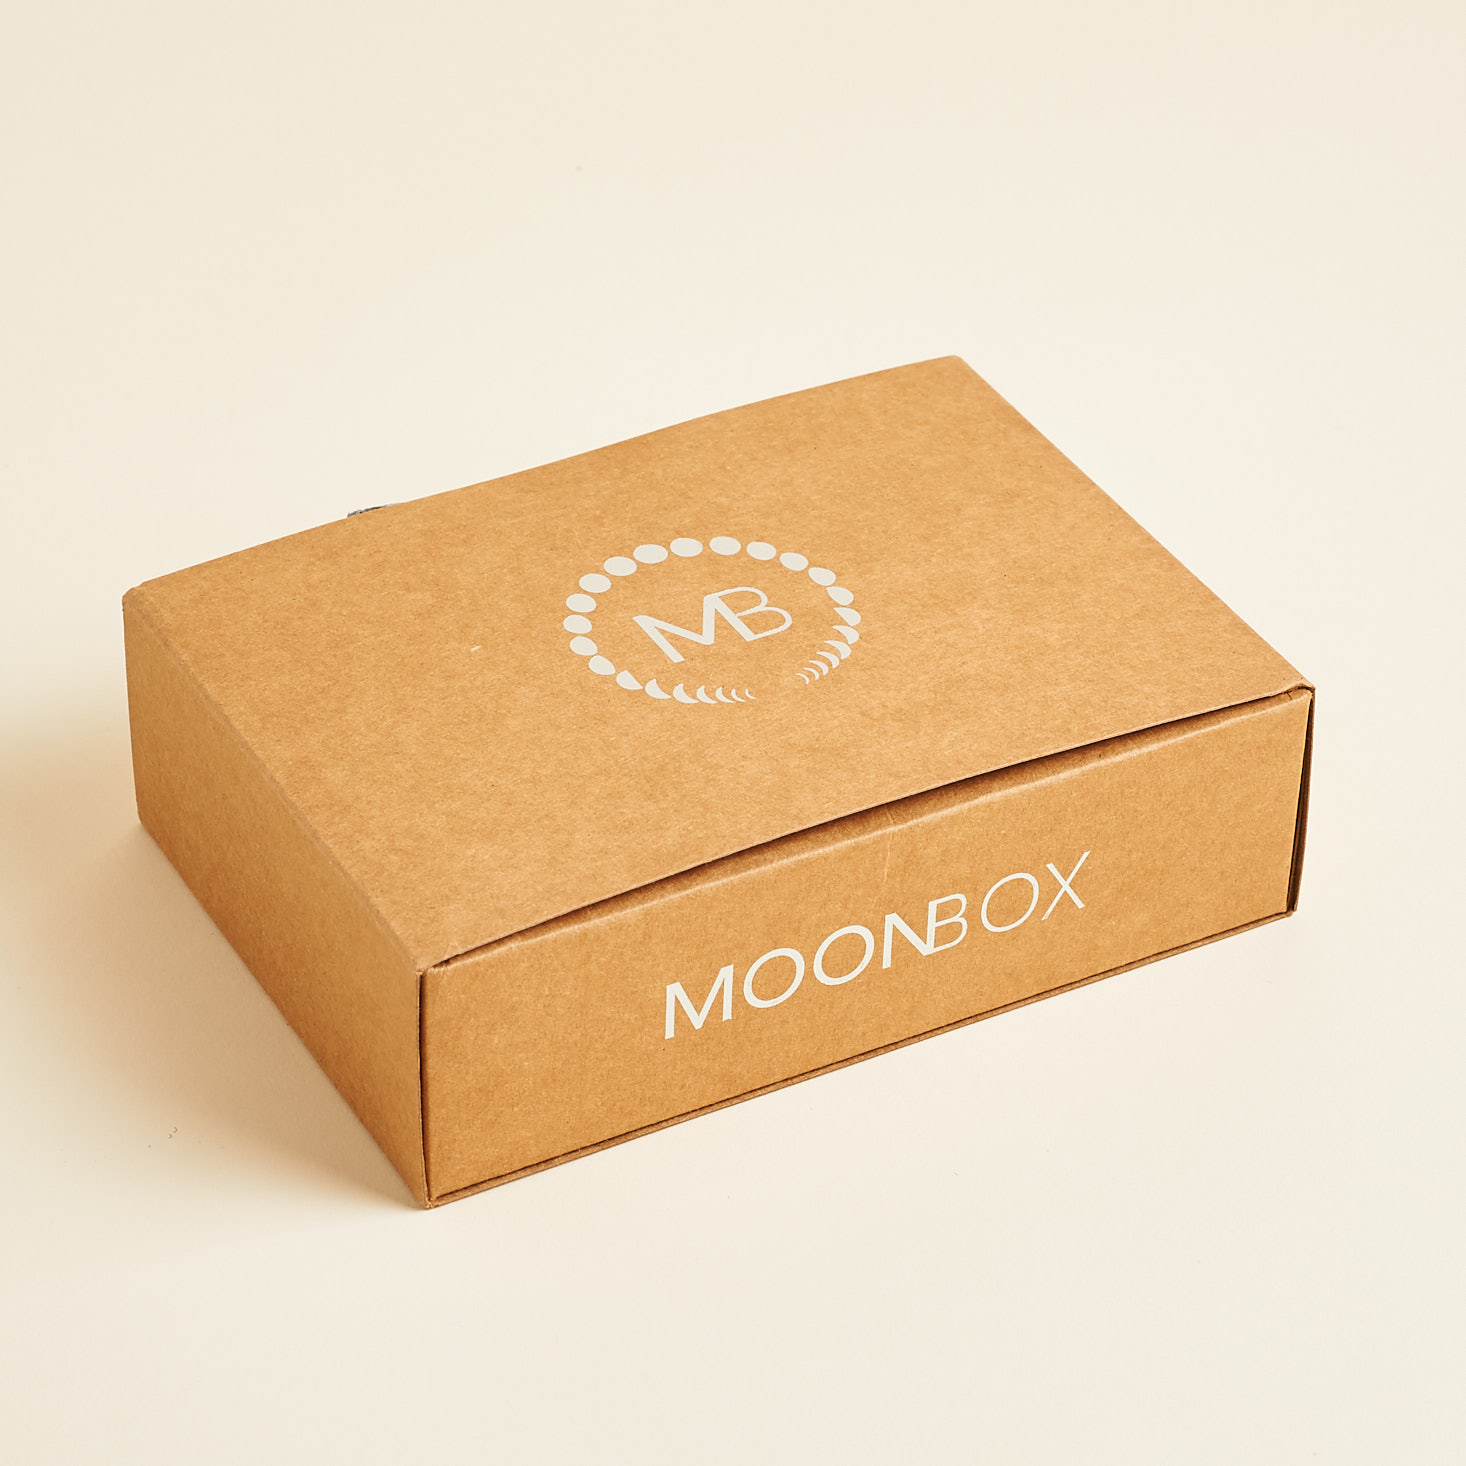 MoonBox by Gaia Collective “Release” Review + Coupon – November 2018